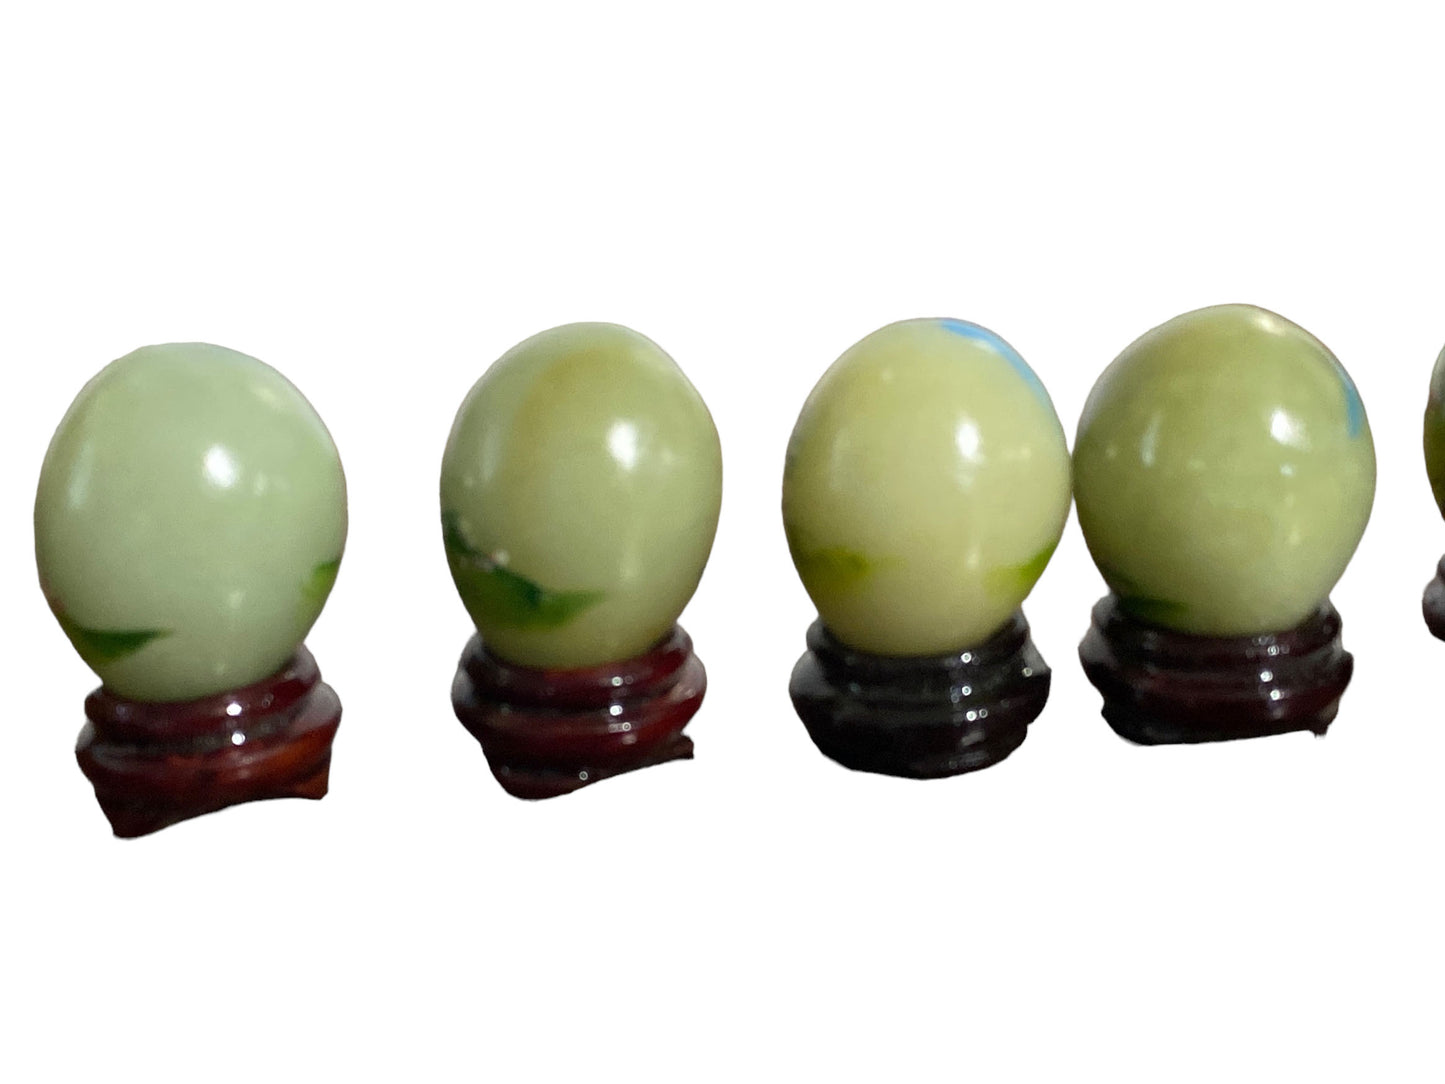 #5710 Chinoiseire Soap Stone Set Of Ten Decorative Eggs On Stand